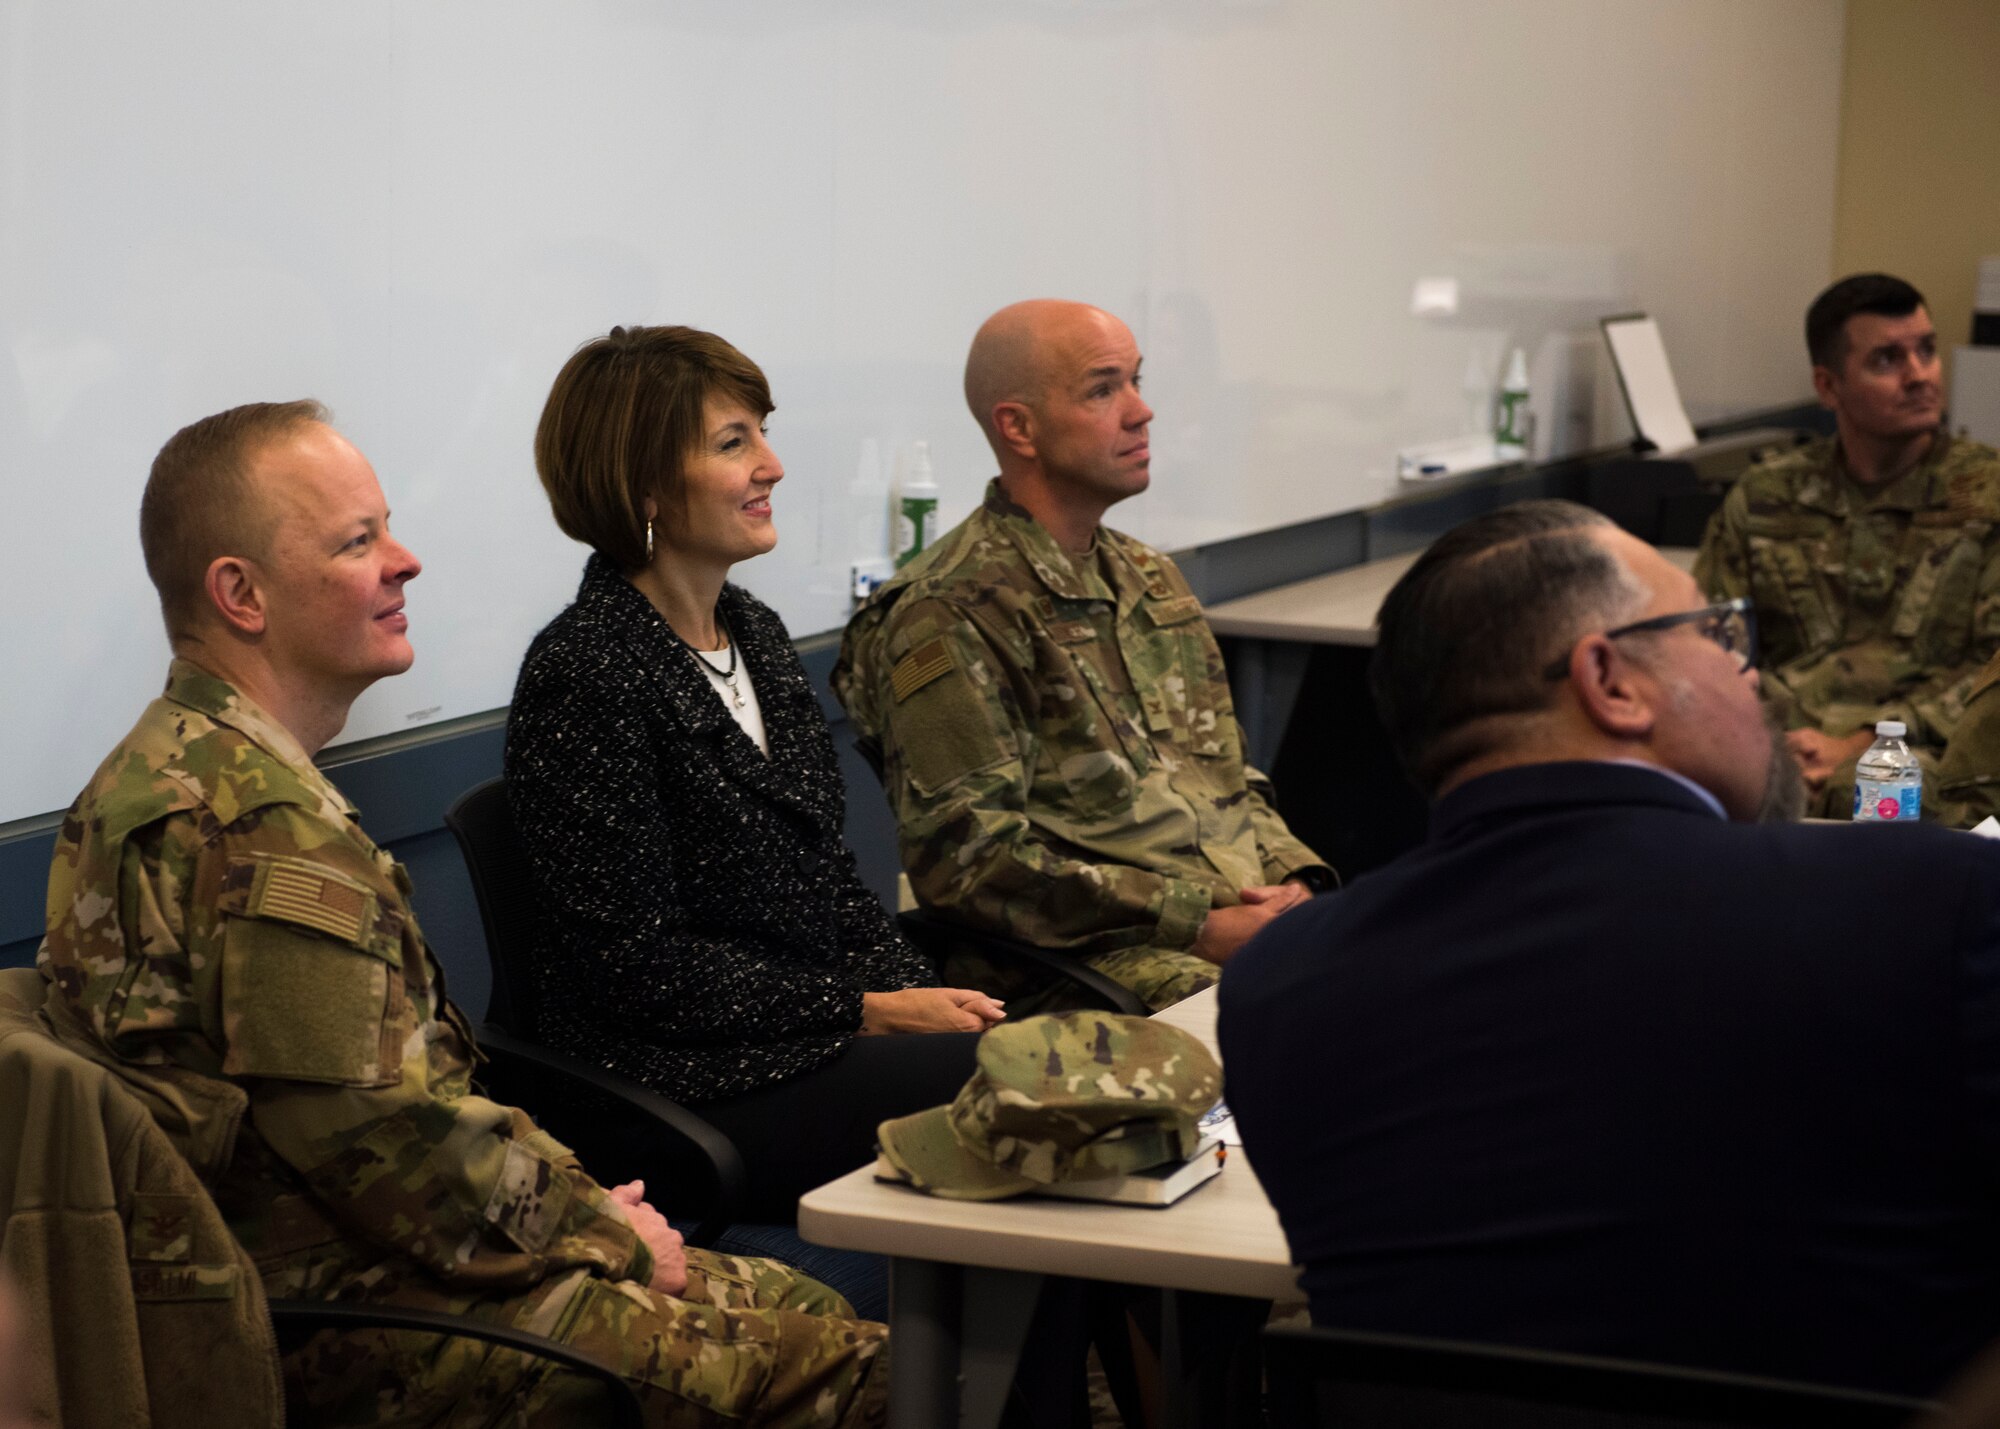 U.S. Representative Cathy McMorris Rogers listens to a brief with U.S. Air Force Col. Derek Salmi, 92nd Air Refueling Wing commander and U.S. Air National Guard Col. Larry Gardner, 141st Air Refueling commander, during her visit to Fairchild Air Force Base, Washington, Nov. 7, 2019. Wing leadership met with McMorris Rogers and her staffers to address housing availability issues as well as current civilian employment wages, in an effort to improve the quality of life and service for Airmen. (U.S. Air Force phot by Airman 1st Class Lawrence Sena)